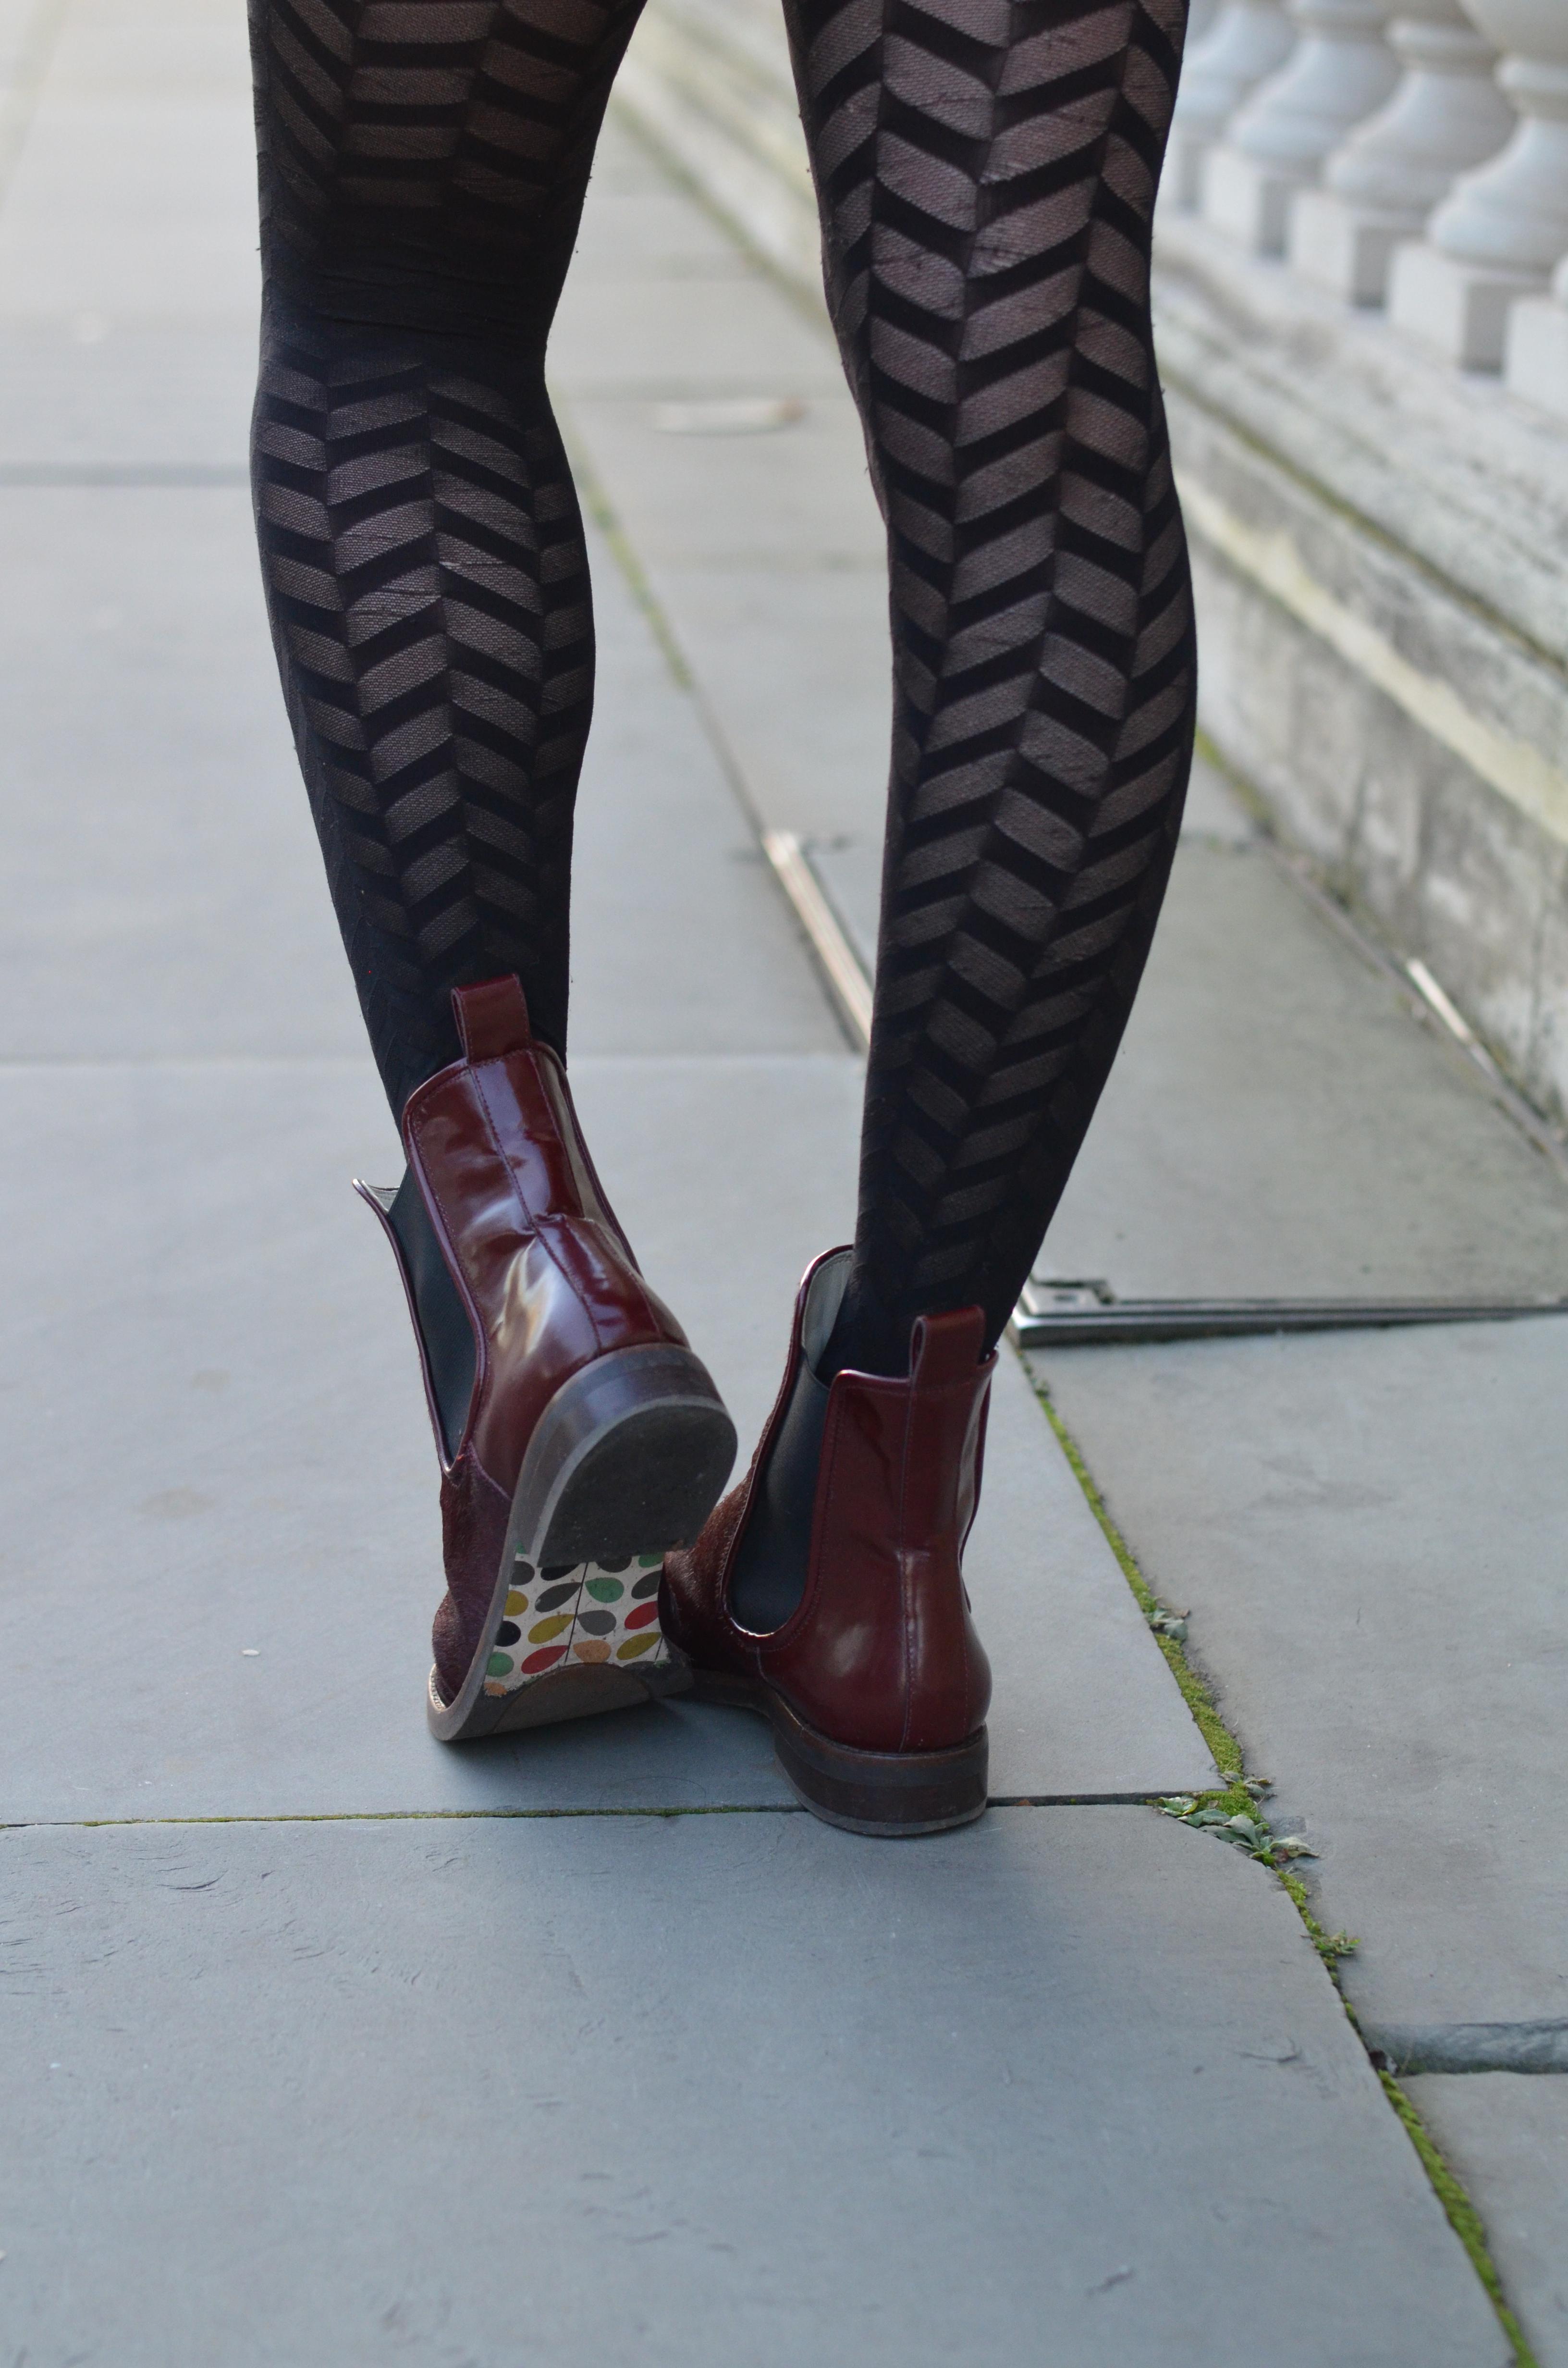 boots-clarks-orla-kiely-collaboration-mode-chaussures-look-londres